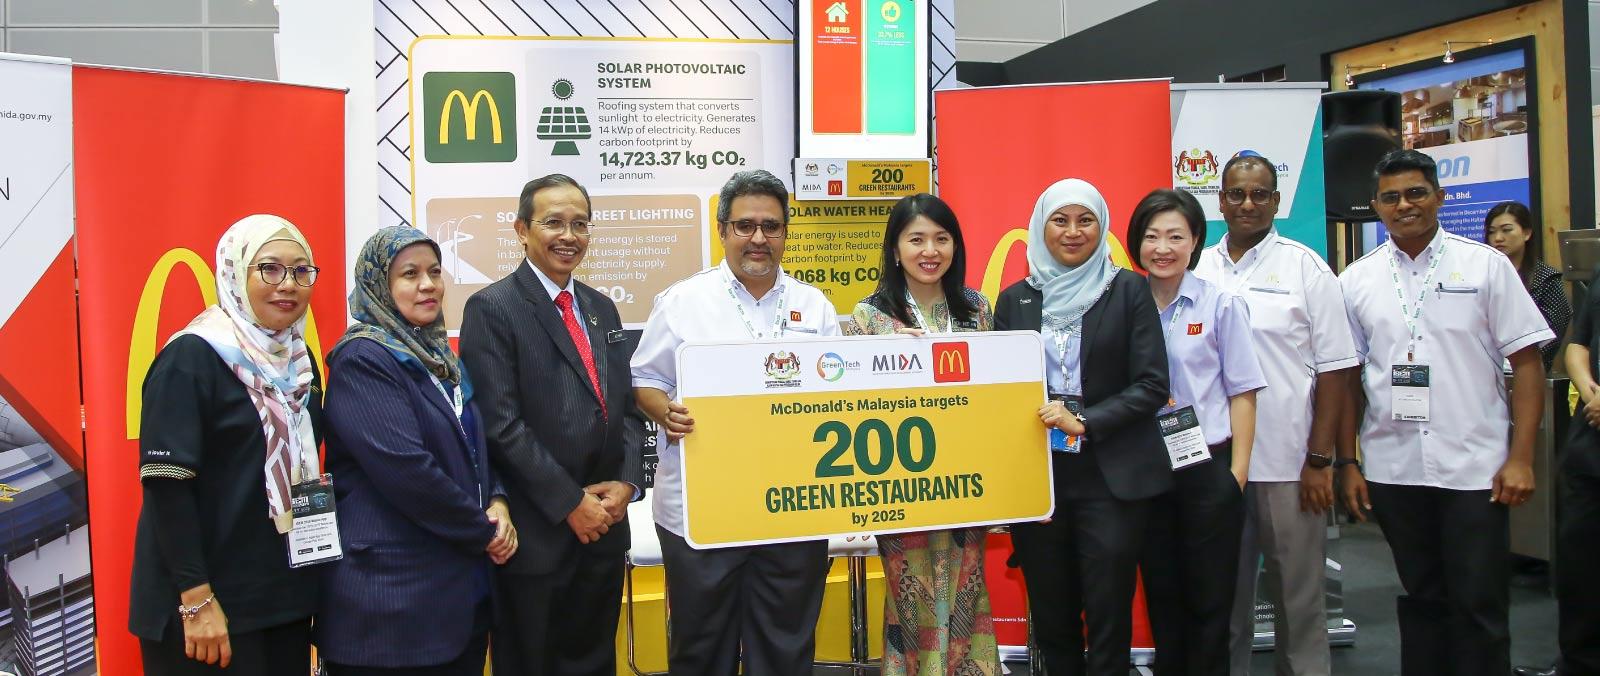 McDonald’s Malaysia targets 200 green restaurants by 2025's image'